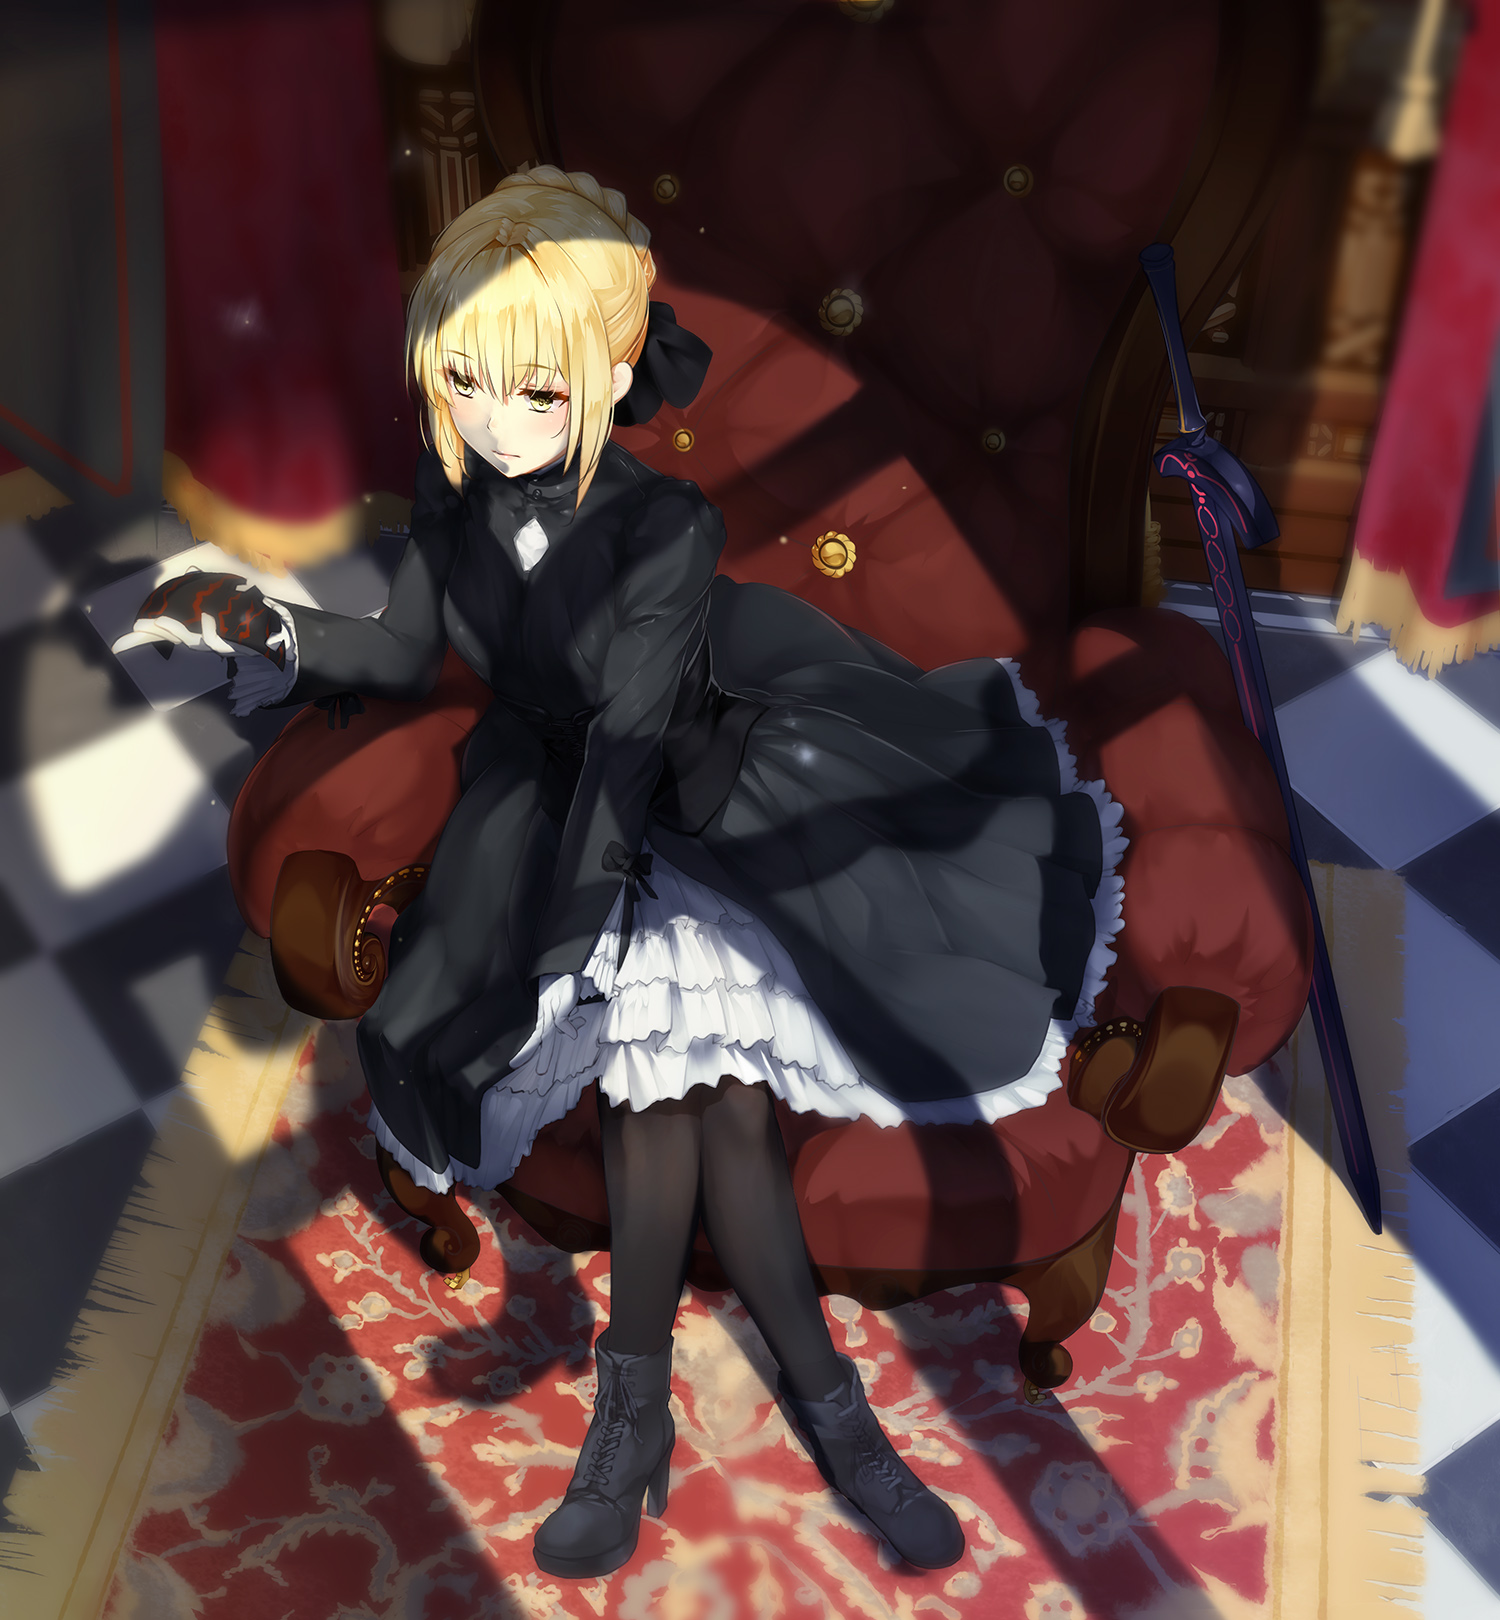 Anime 1500x1620 Fate series Fate/Stay Night anime girls Saber Alter fate/stay night: heaven's feel Fate/Grand Order Fate/Hollow Ataraxia black dress pantyhose blushing small boobs sitting gothic lolita white gloves thighs black boots Excalibur bangs yellow eyes 2D anime